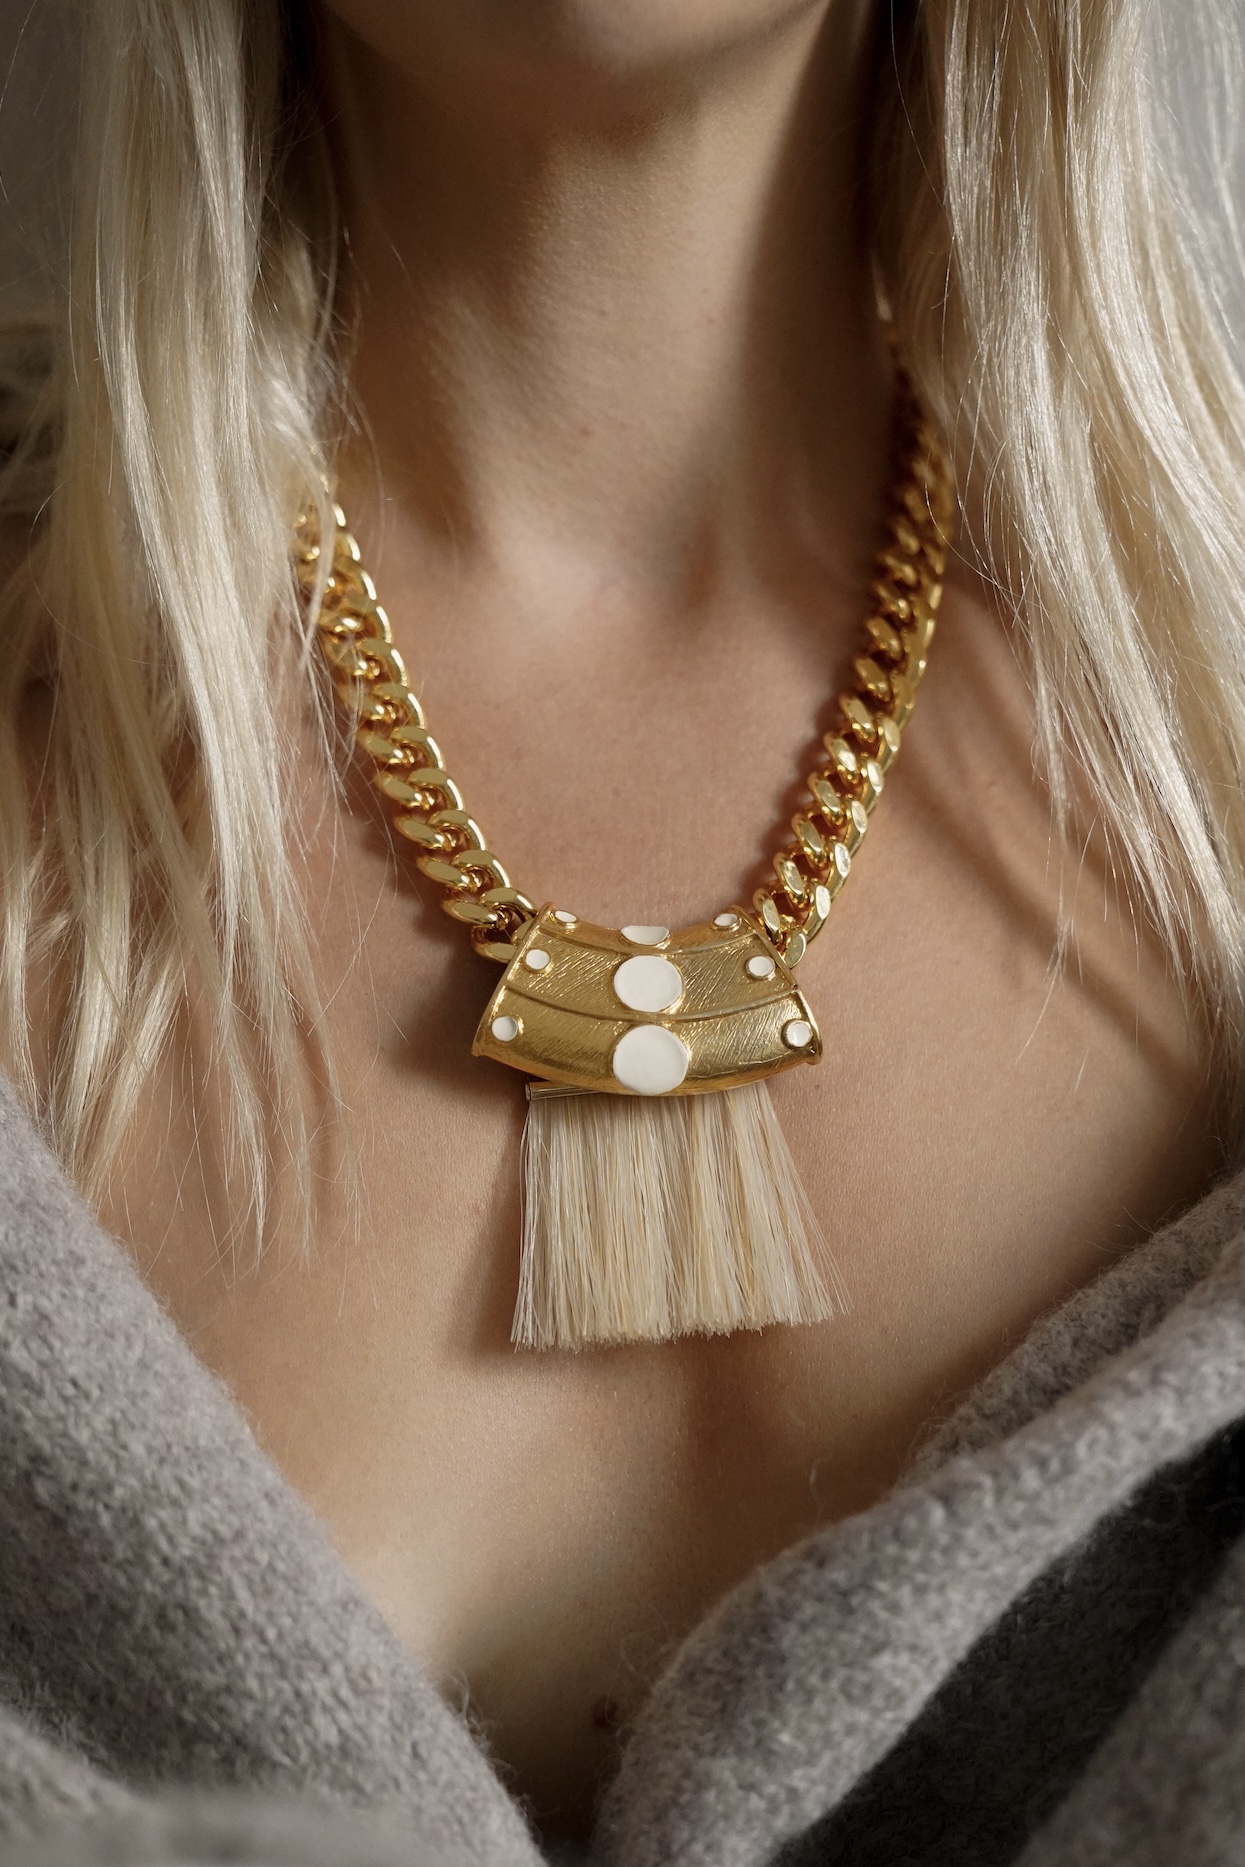 alison-wu-haus-anna-monet-necklace-gold-jewelry